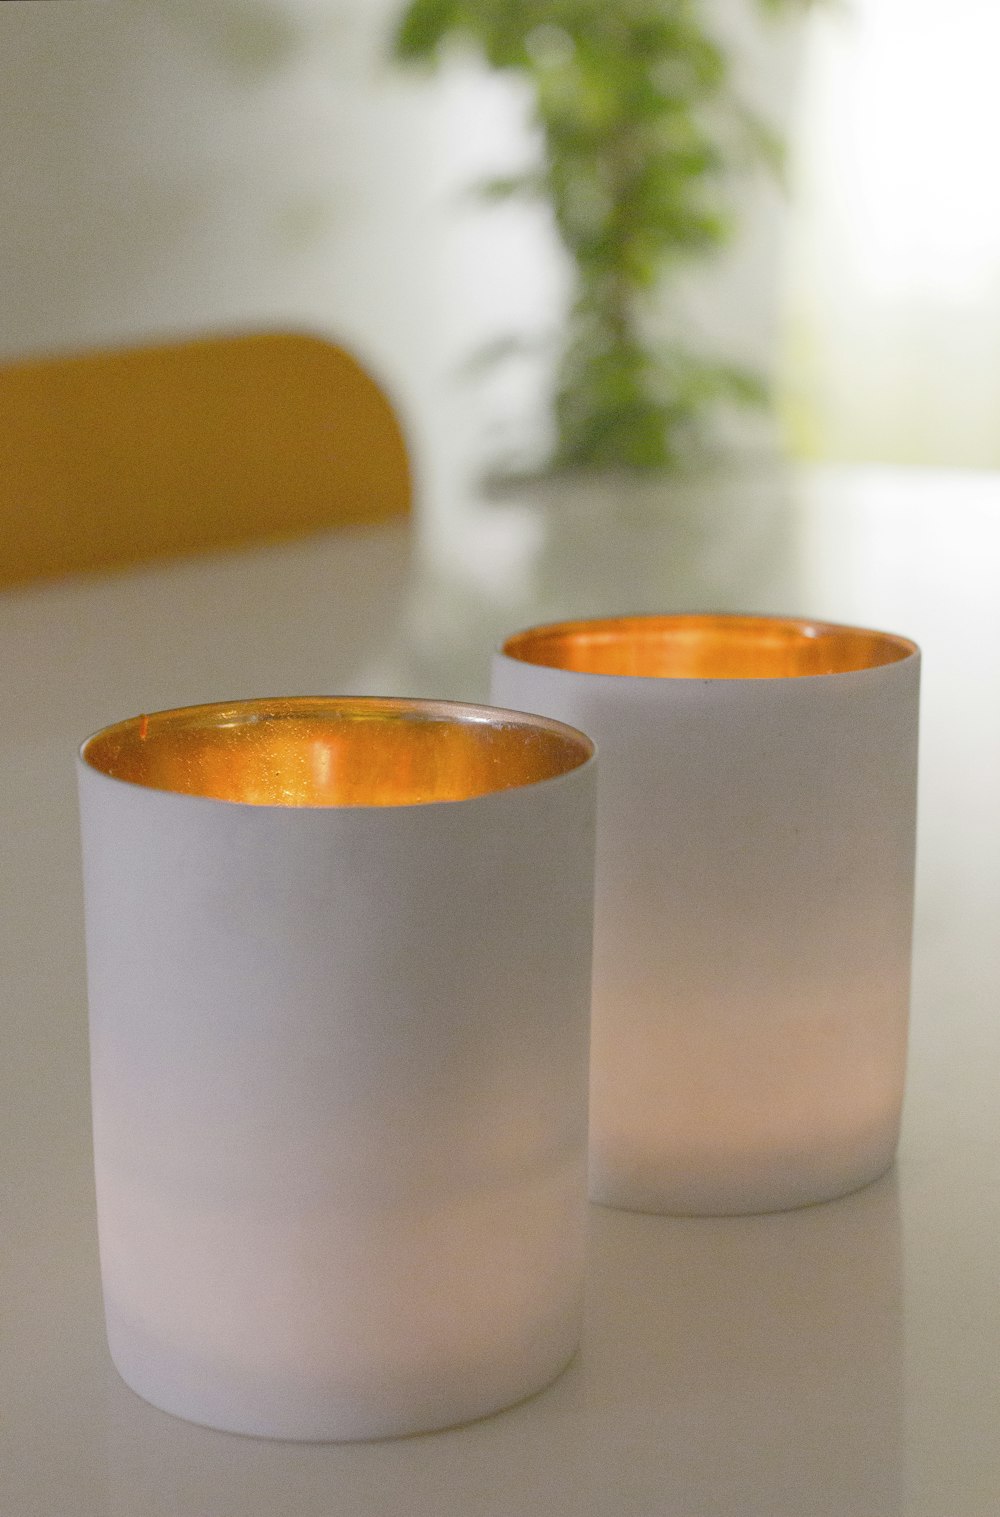 white pillar candles on brown wooden table